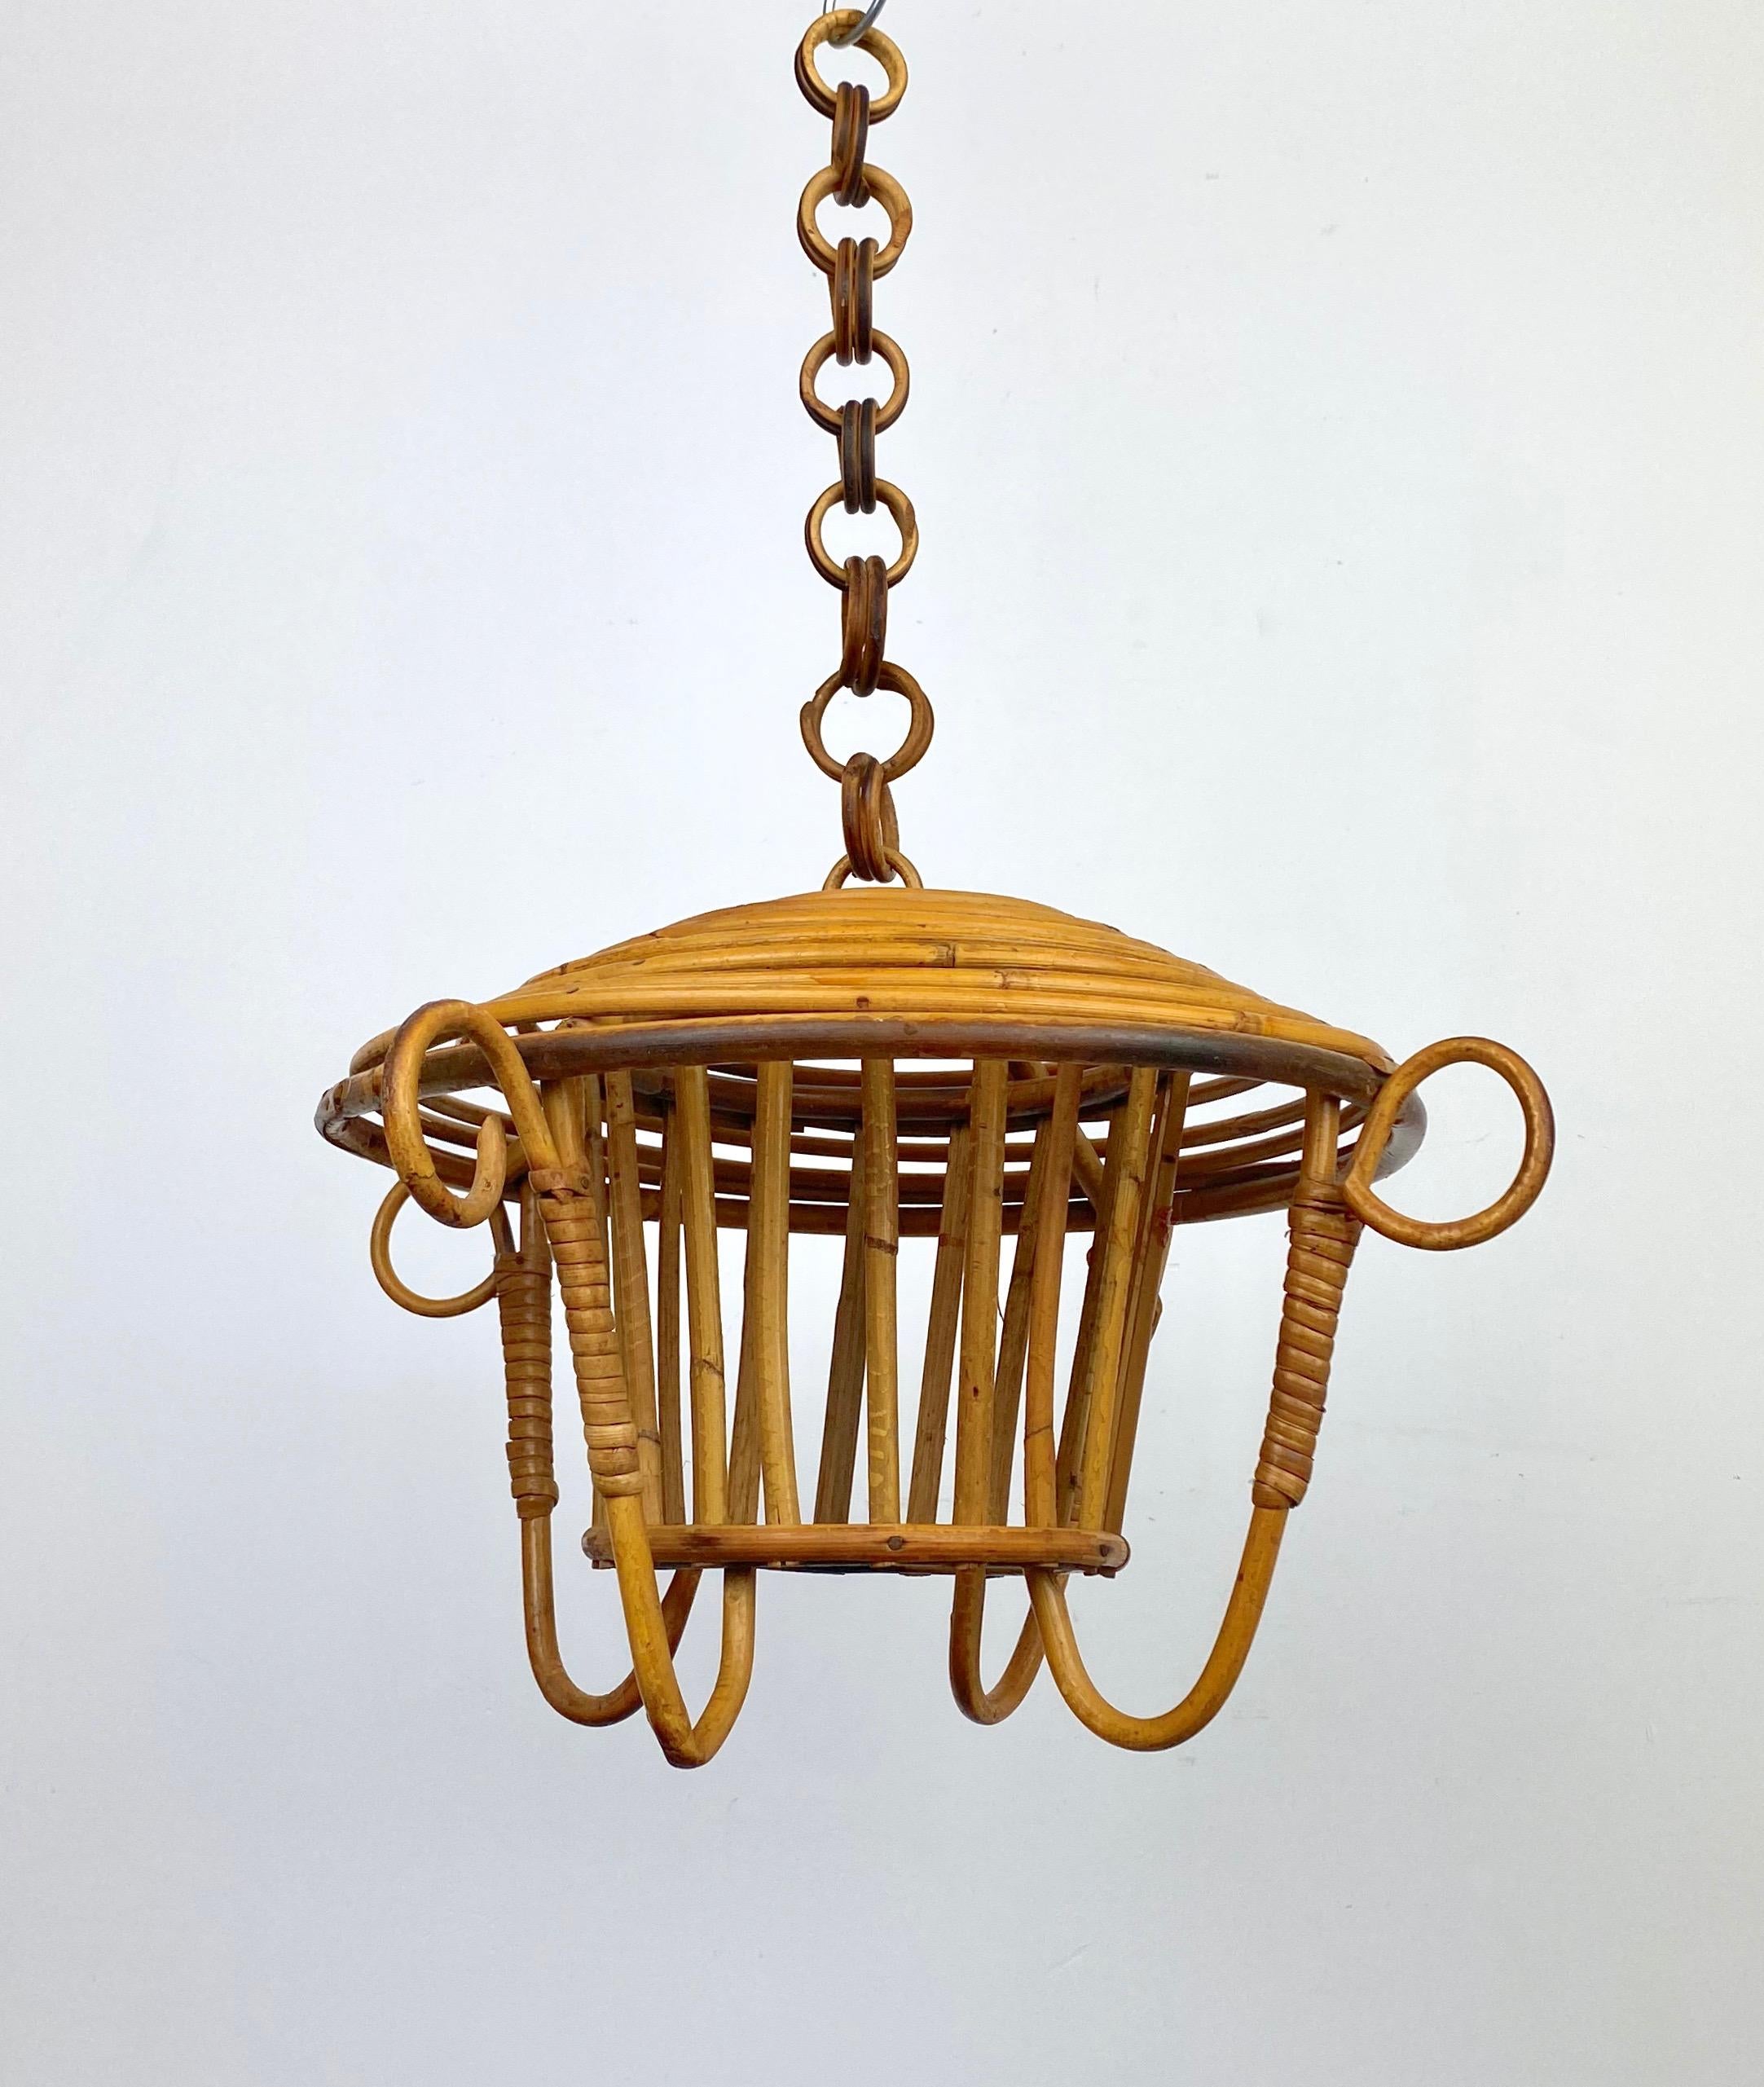 Chandelier pendant lantern shaped in bamboo and rattan. Made in Italy, circa 1960.